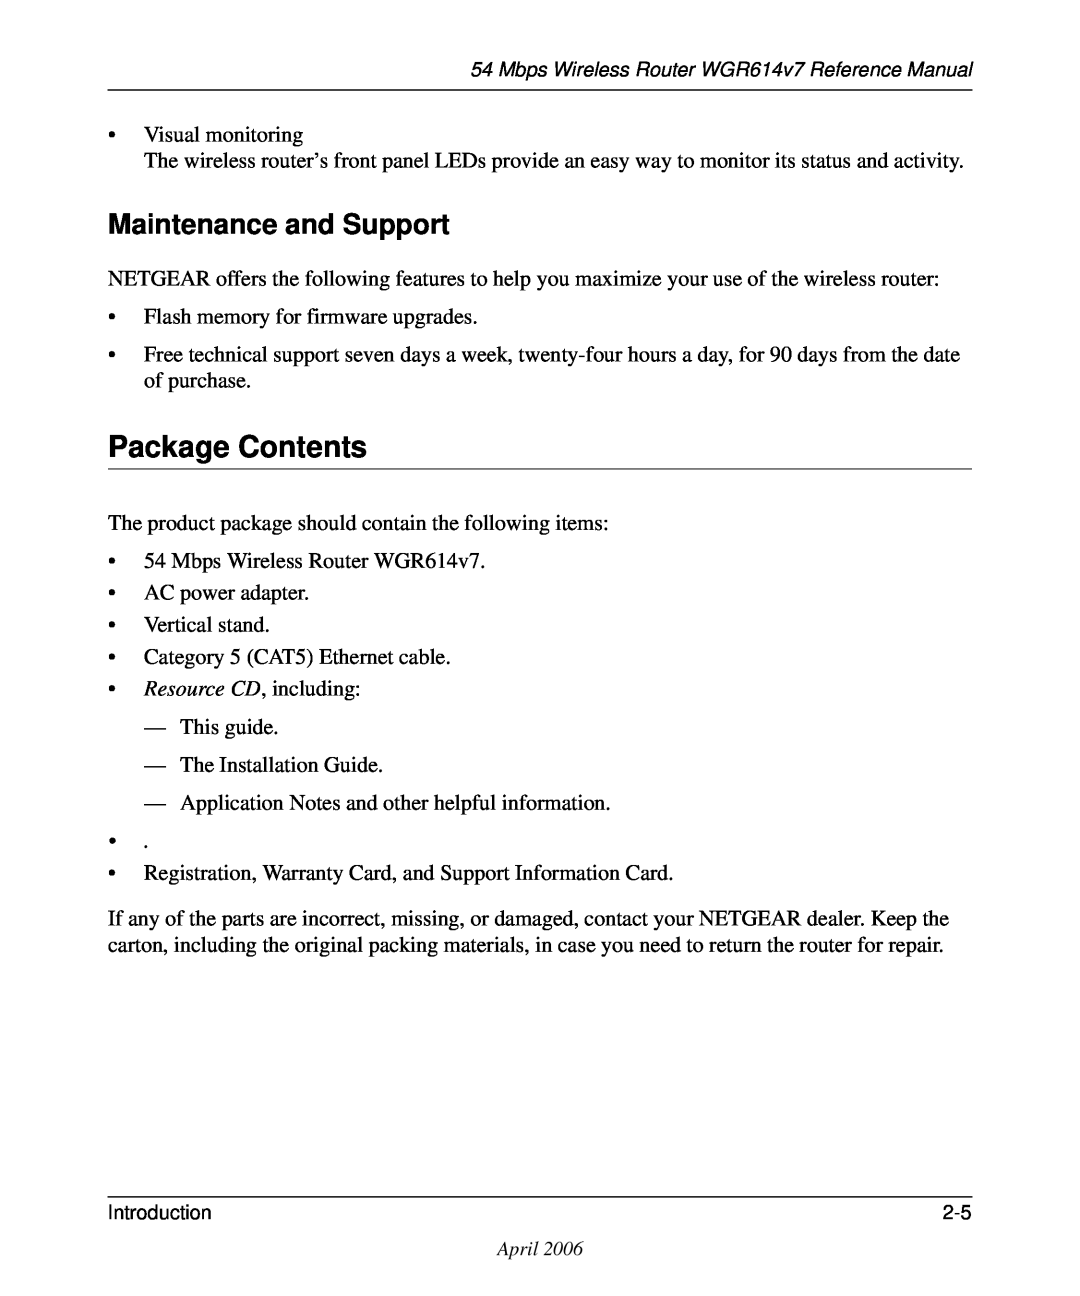 NETGEAR WGR614v7 manual Package Contents, Maintenance and Support 